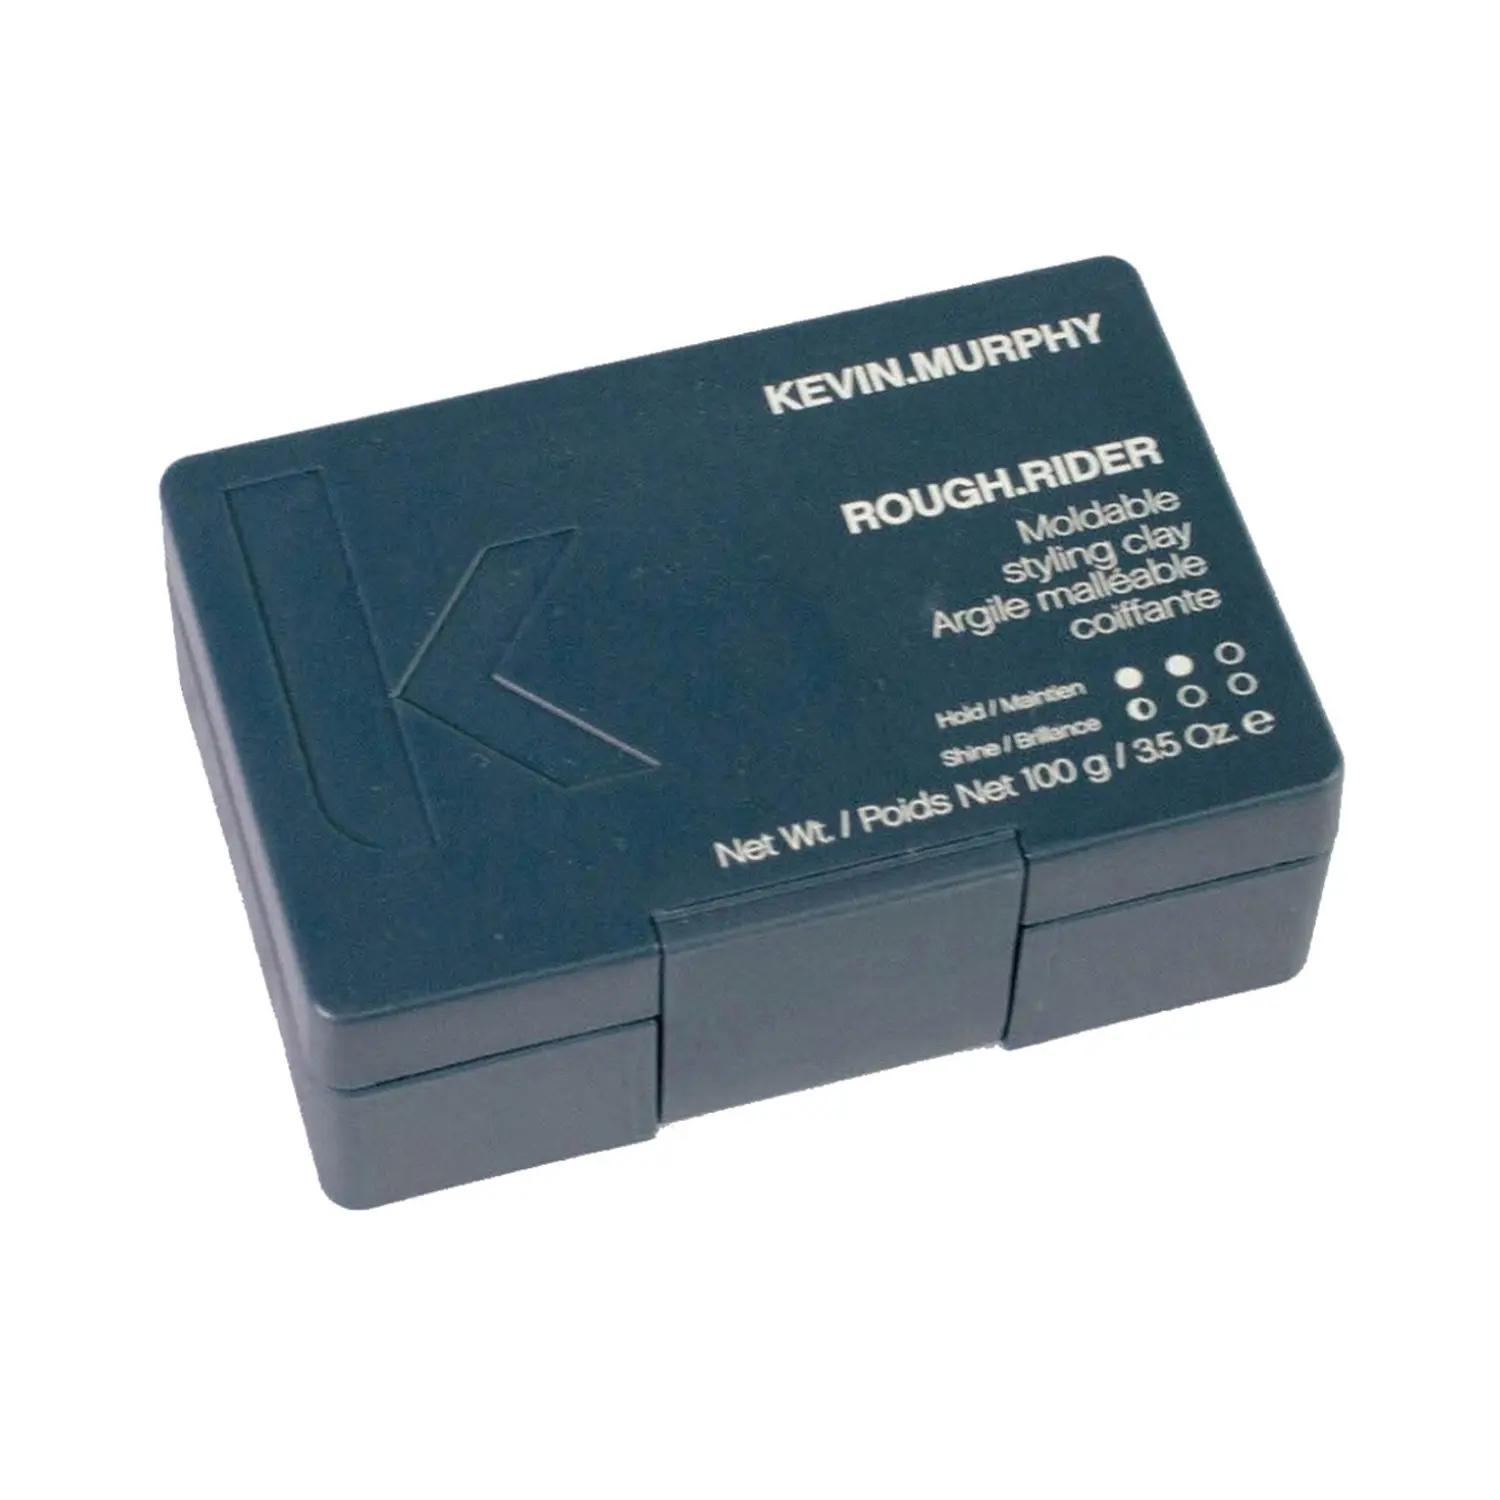 kevin murphy rough rider strong hold matte clay (100g)